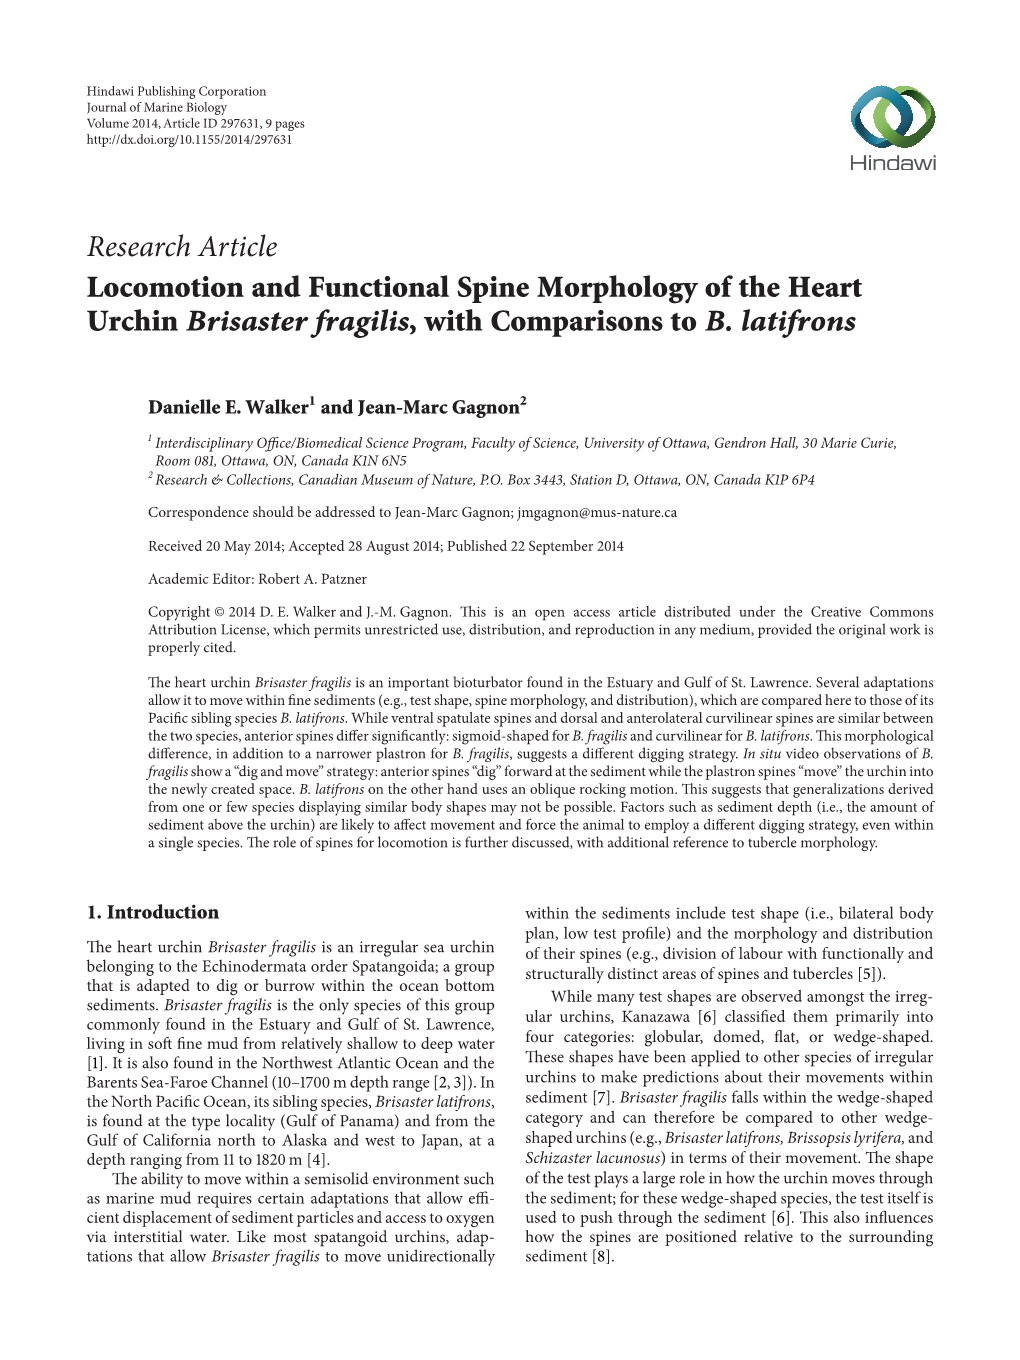 Locomotion and Functional Spine Morphology of the Heart Urchin Brisaster Fragilis, with Comparisons to B. Latifrons